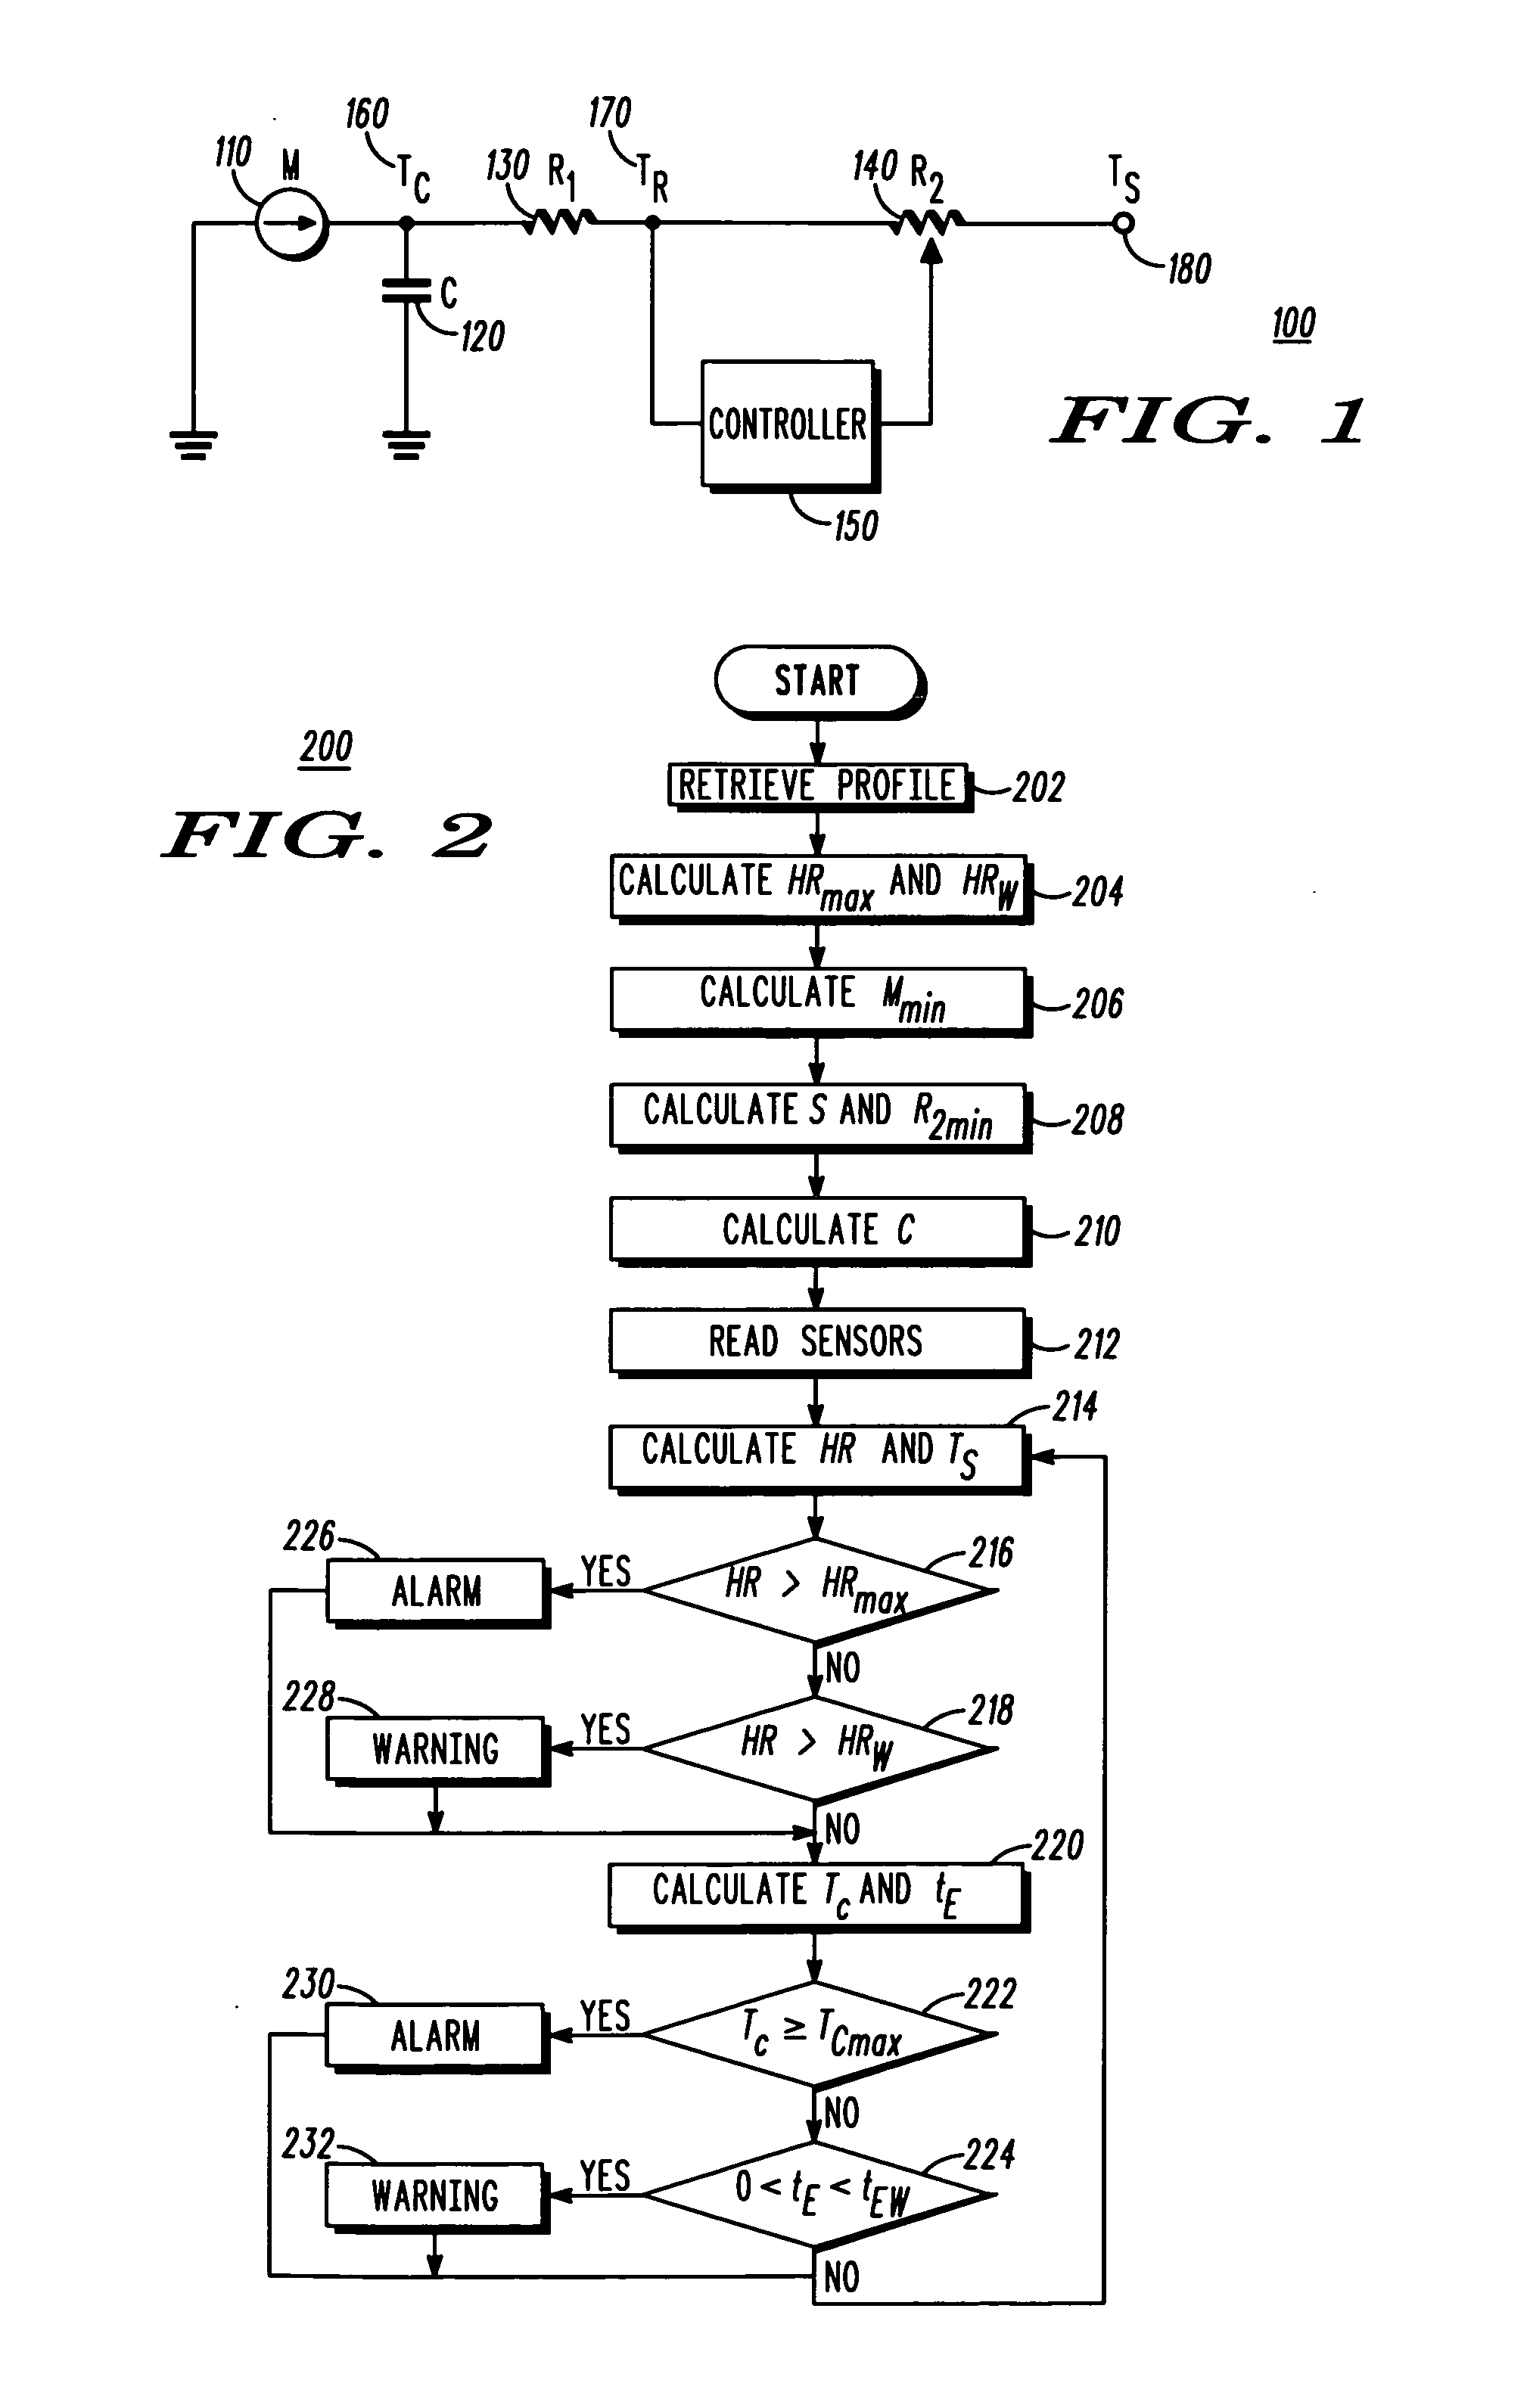 Method and apparatus for monitoring heat stress